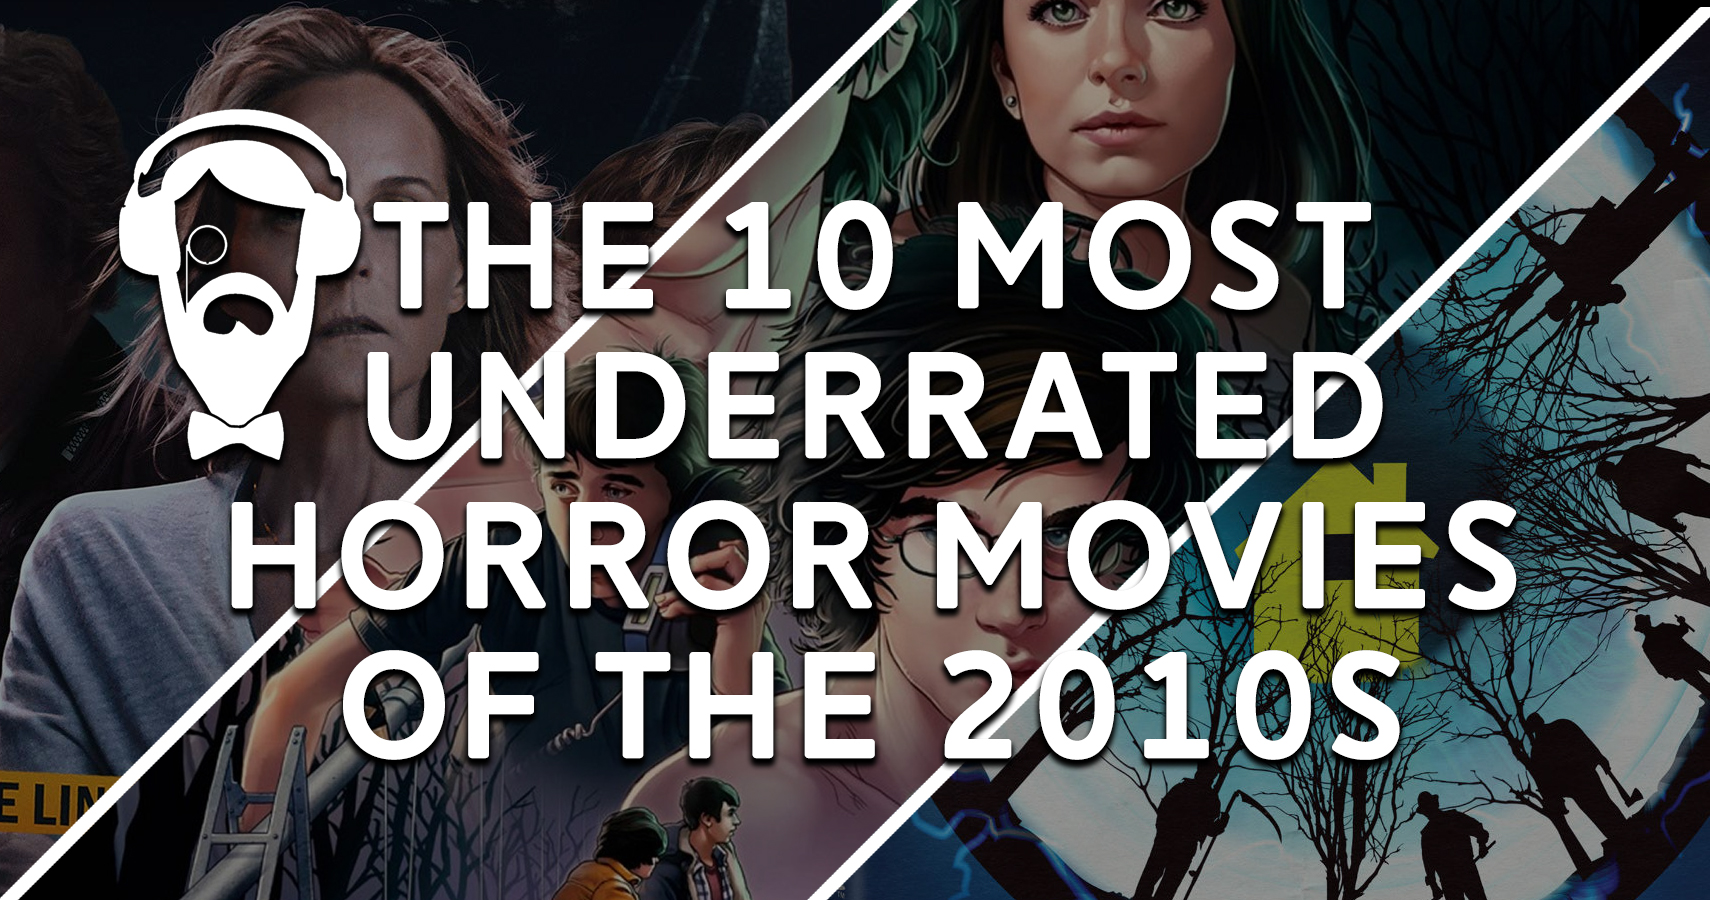 The 10 Most Underrated Horror Movies of the 2010s